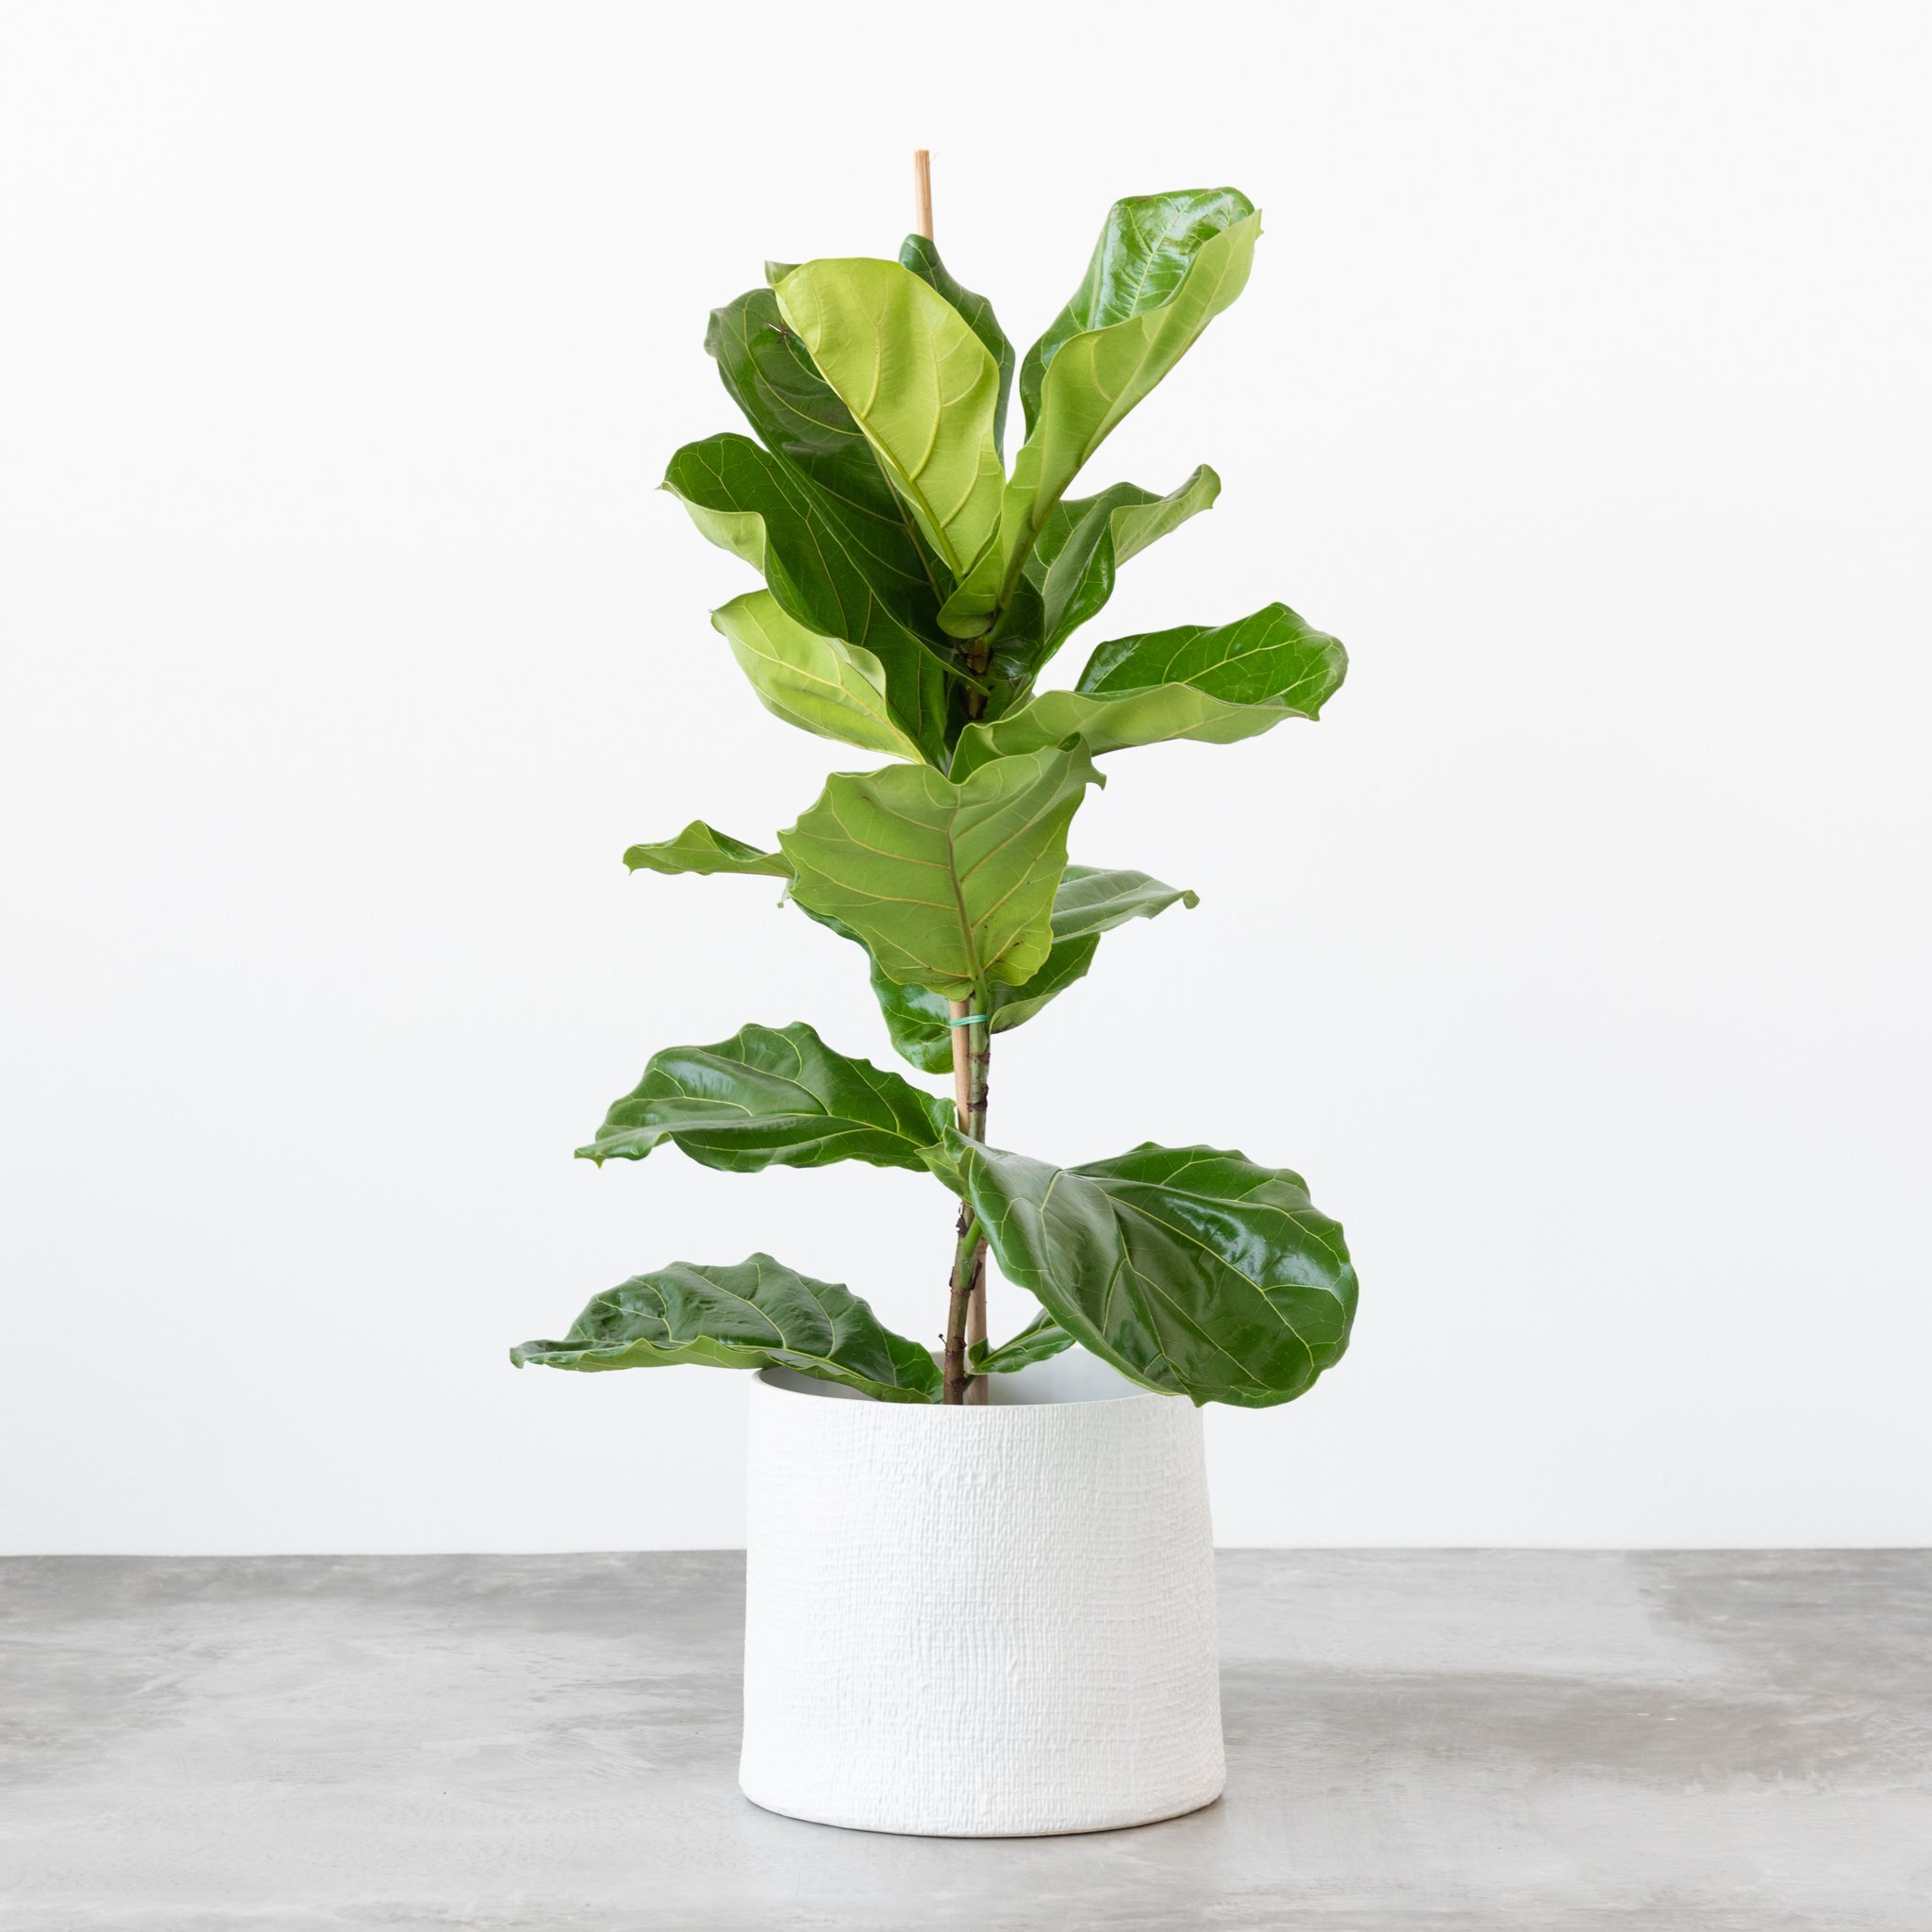 The Fiddle Leaf Tree Hates To Be Moved!